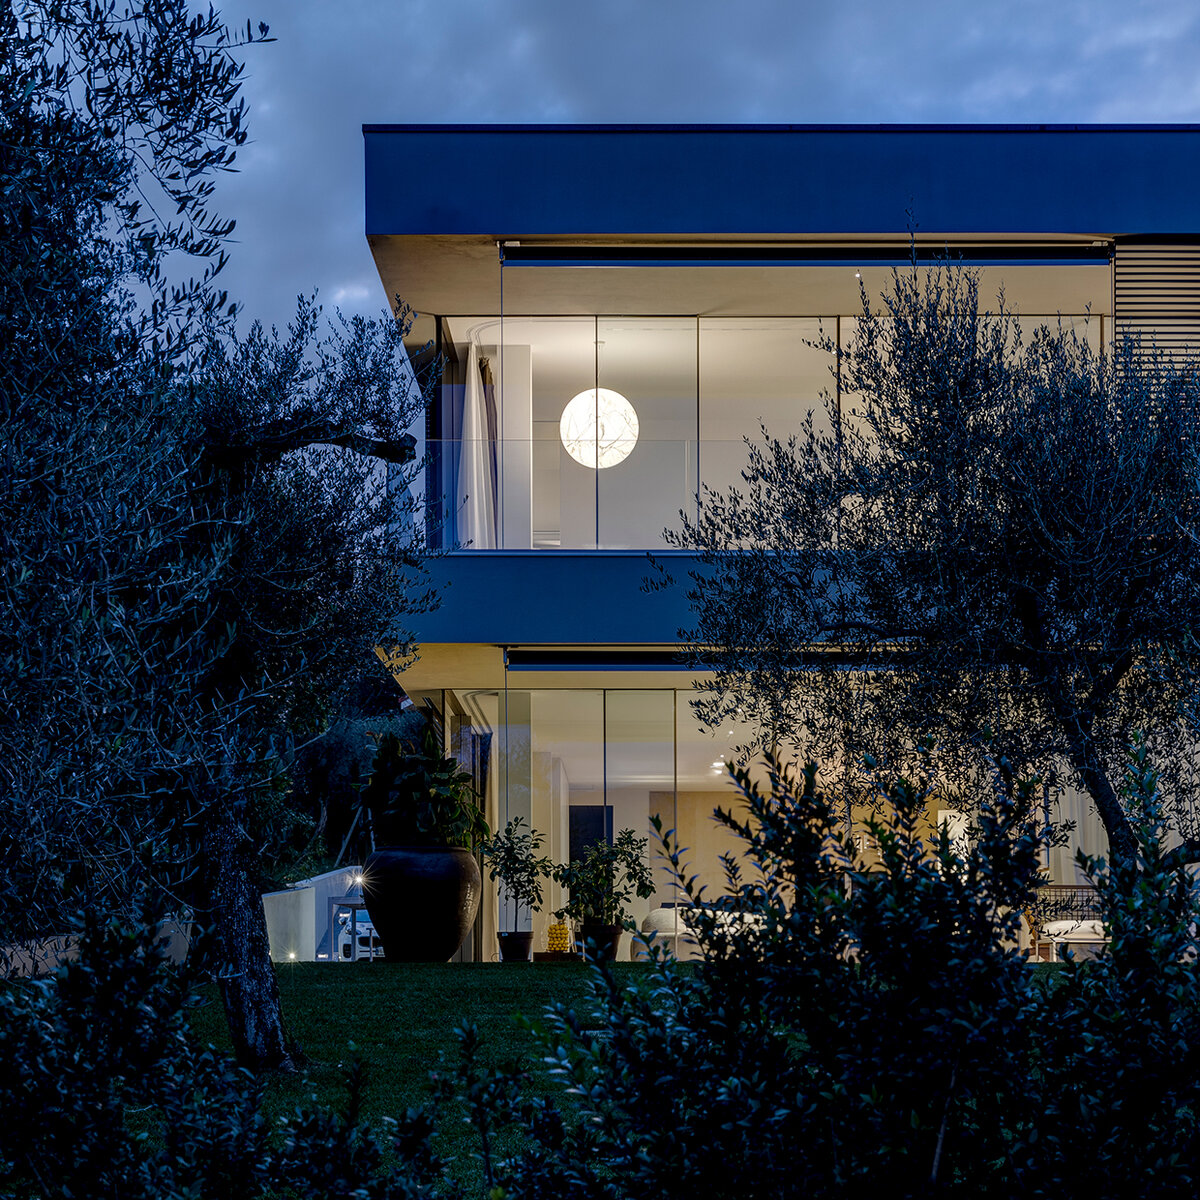 Haus Am See 2 | © Davide Groppi srl | All Rights Reserved